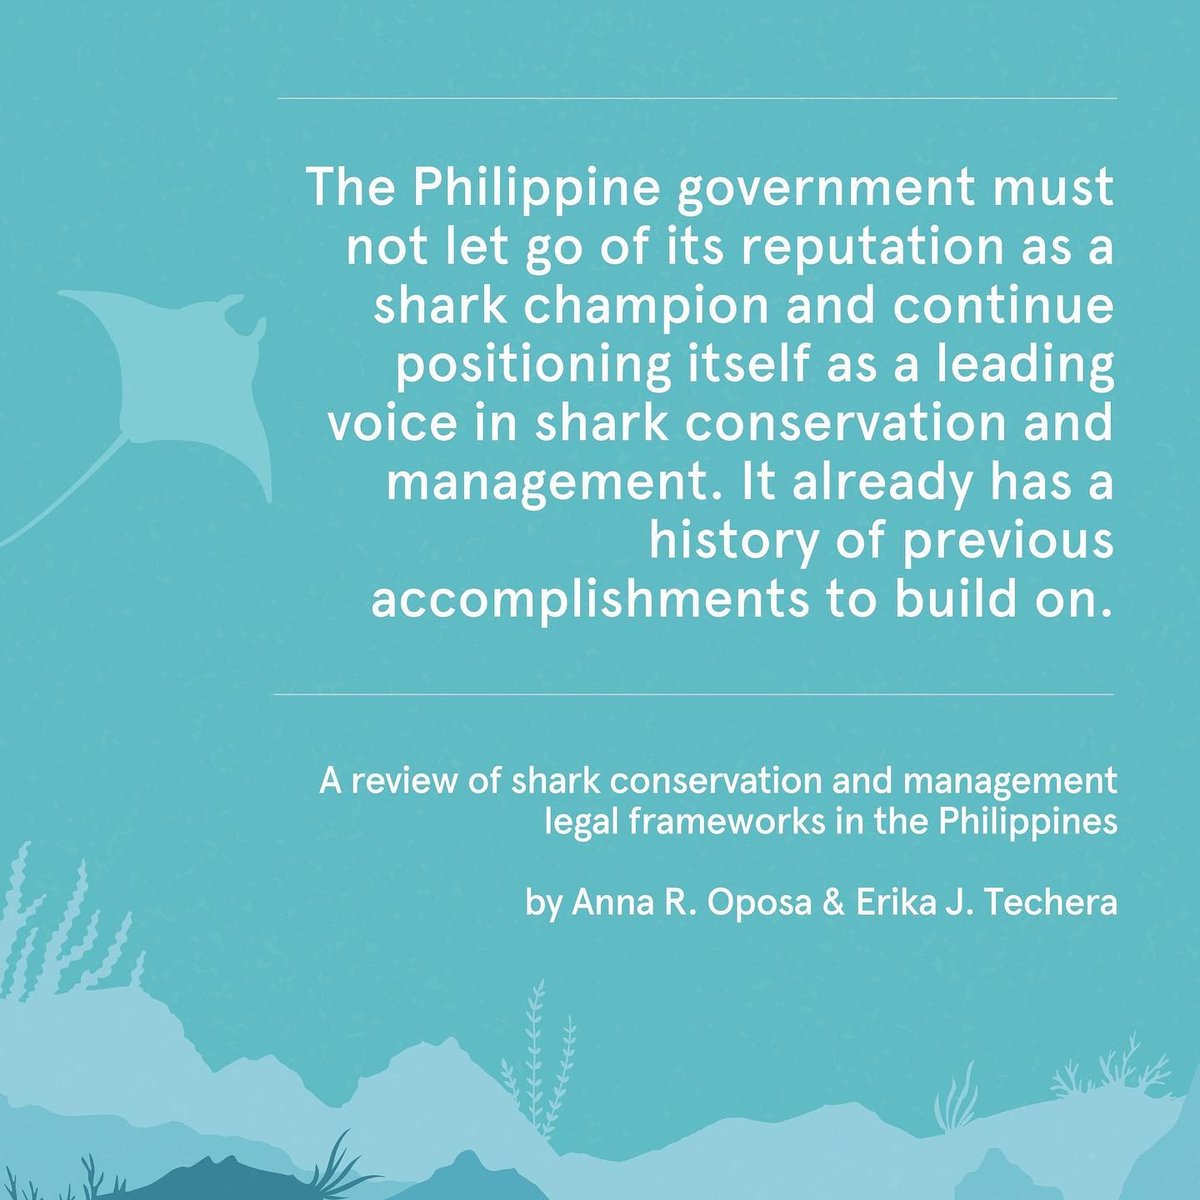 Reposted from @marinewildlifewatchph A poli-sea paper on sharks in the Philippines by @annaoposa and Dr. Erika Techera has been published on Marine Policy! If you’re interested in law, governance, and sharks, this paper is for you! doi.org/10.1016/j.marp…